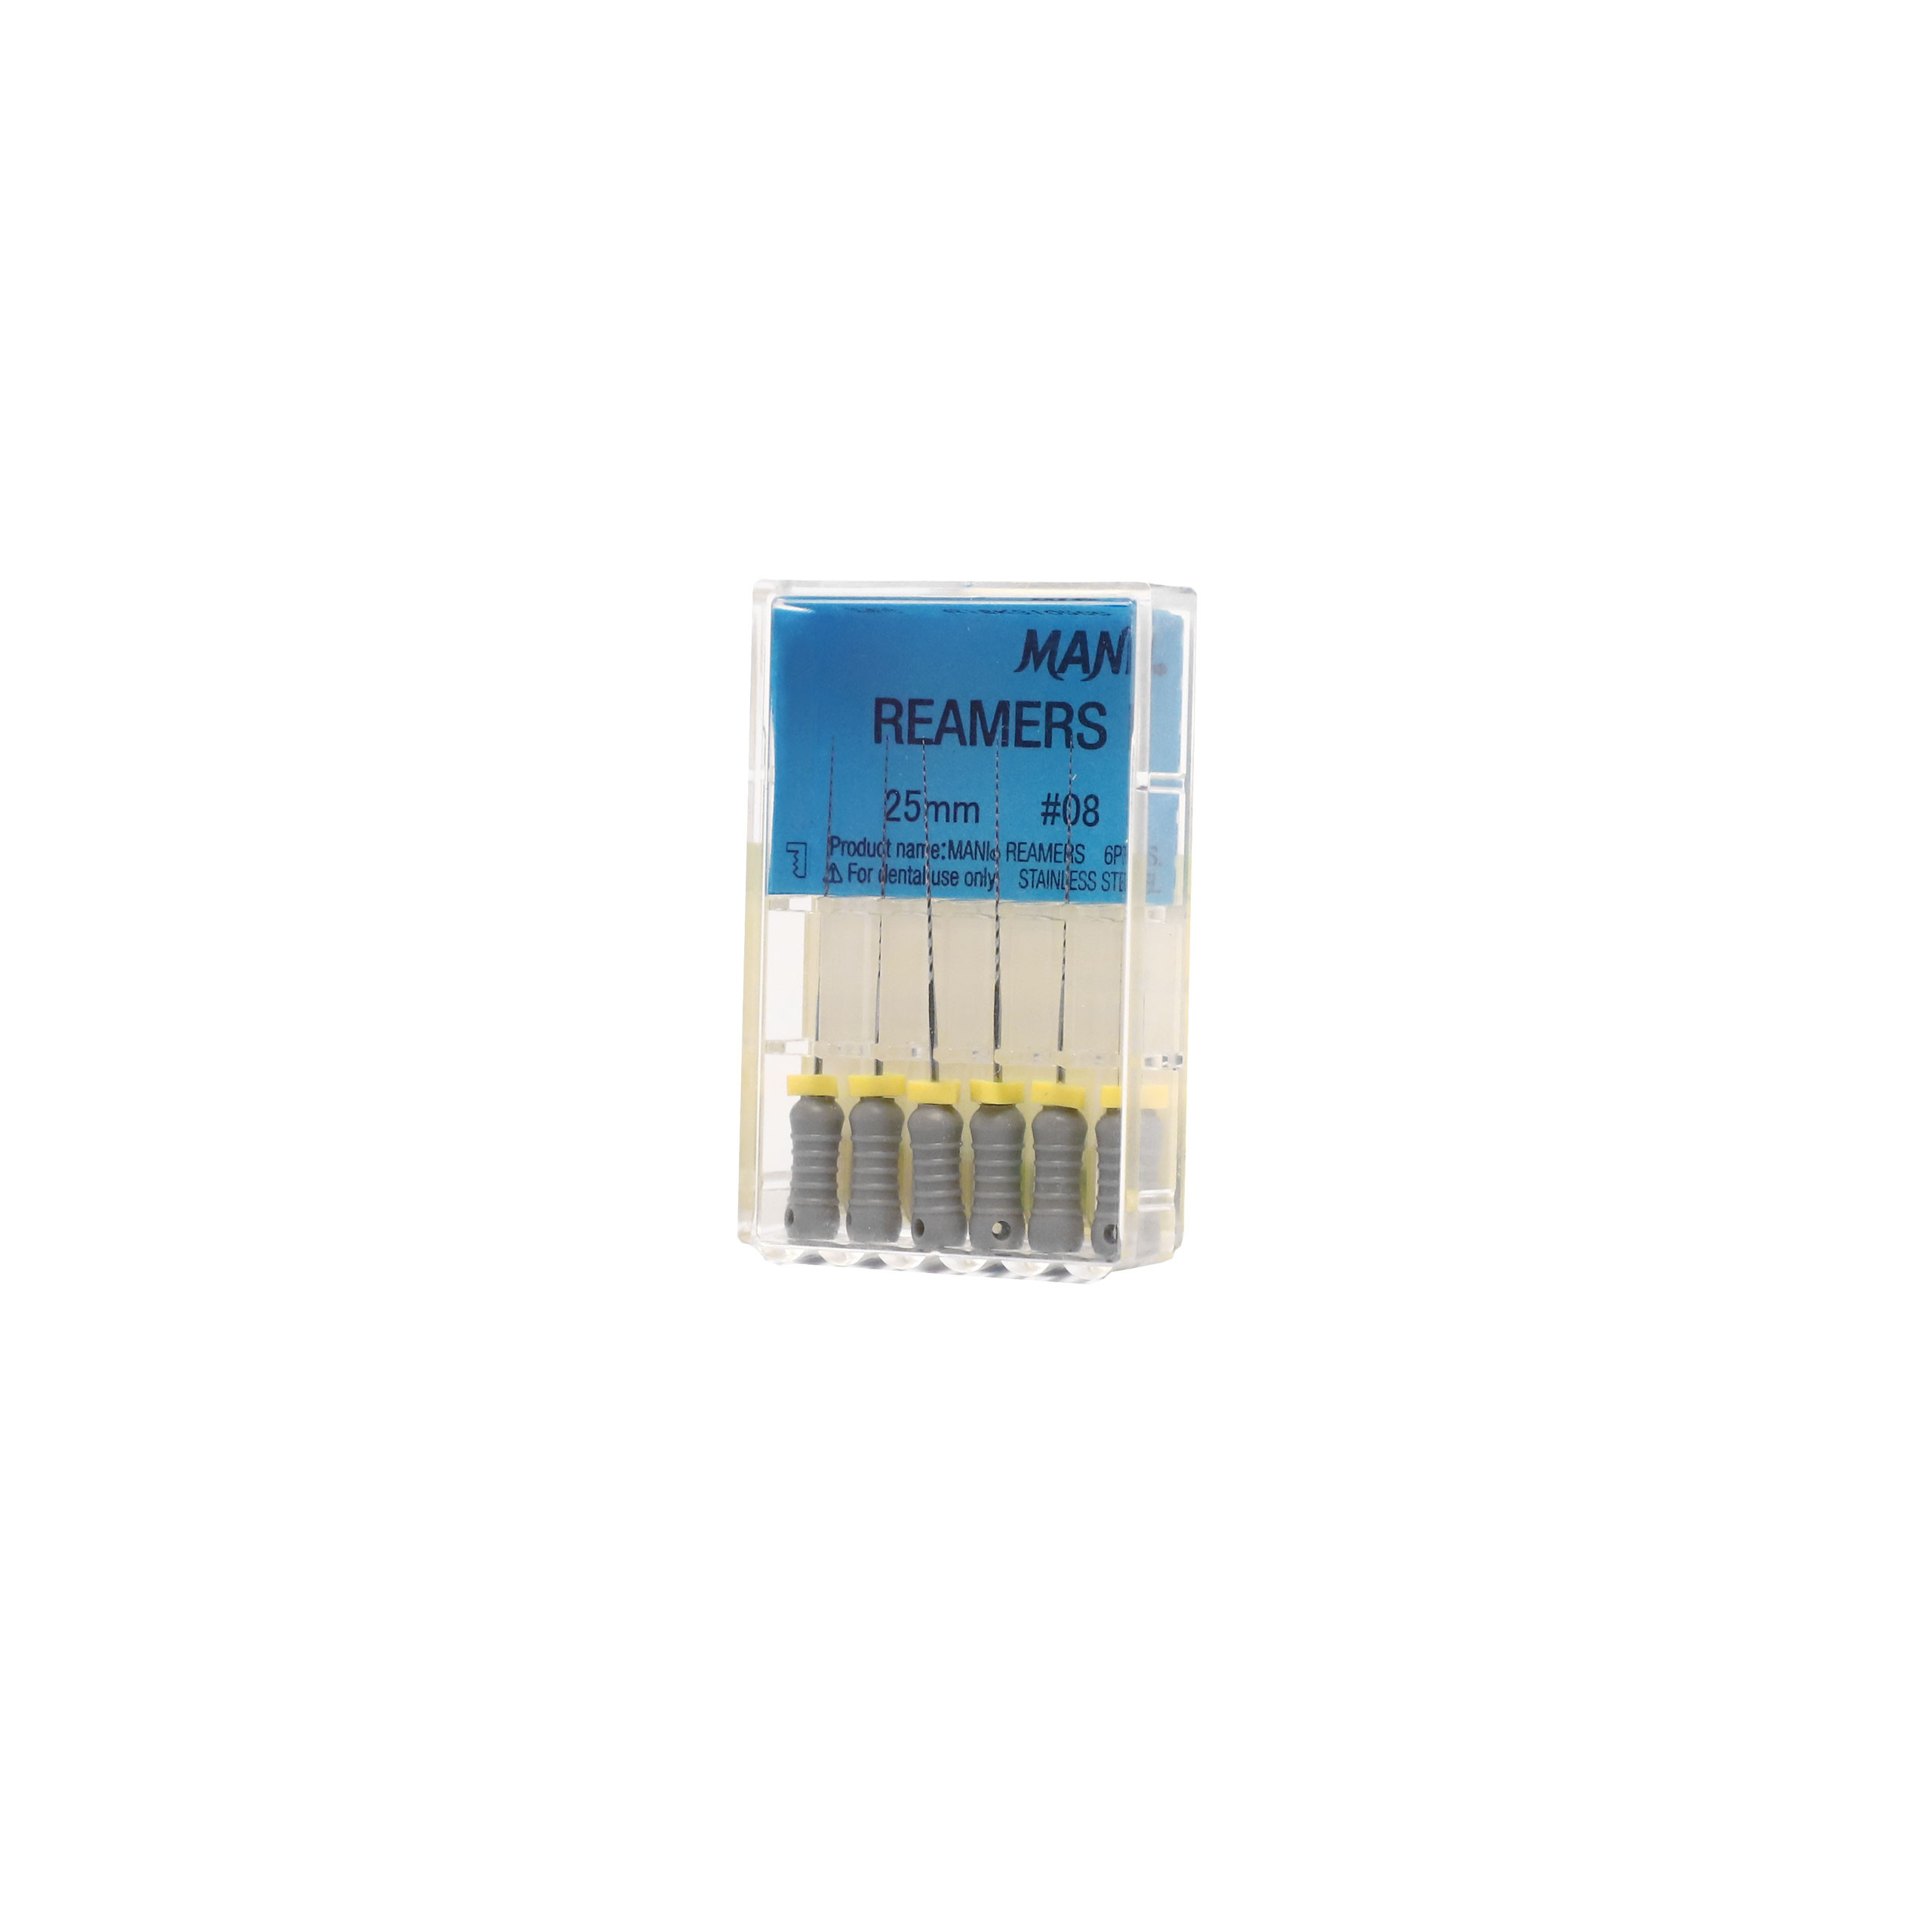 Mani Reamers #08 25mm (Pack Of 5)